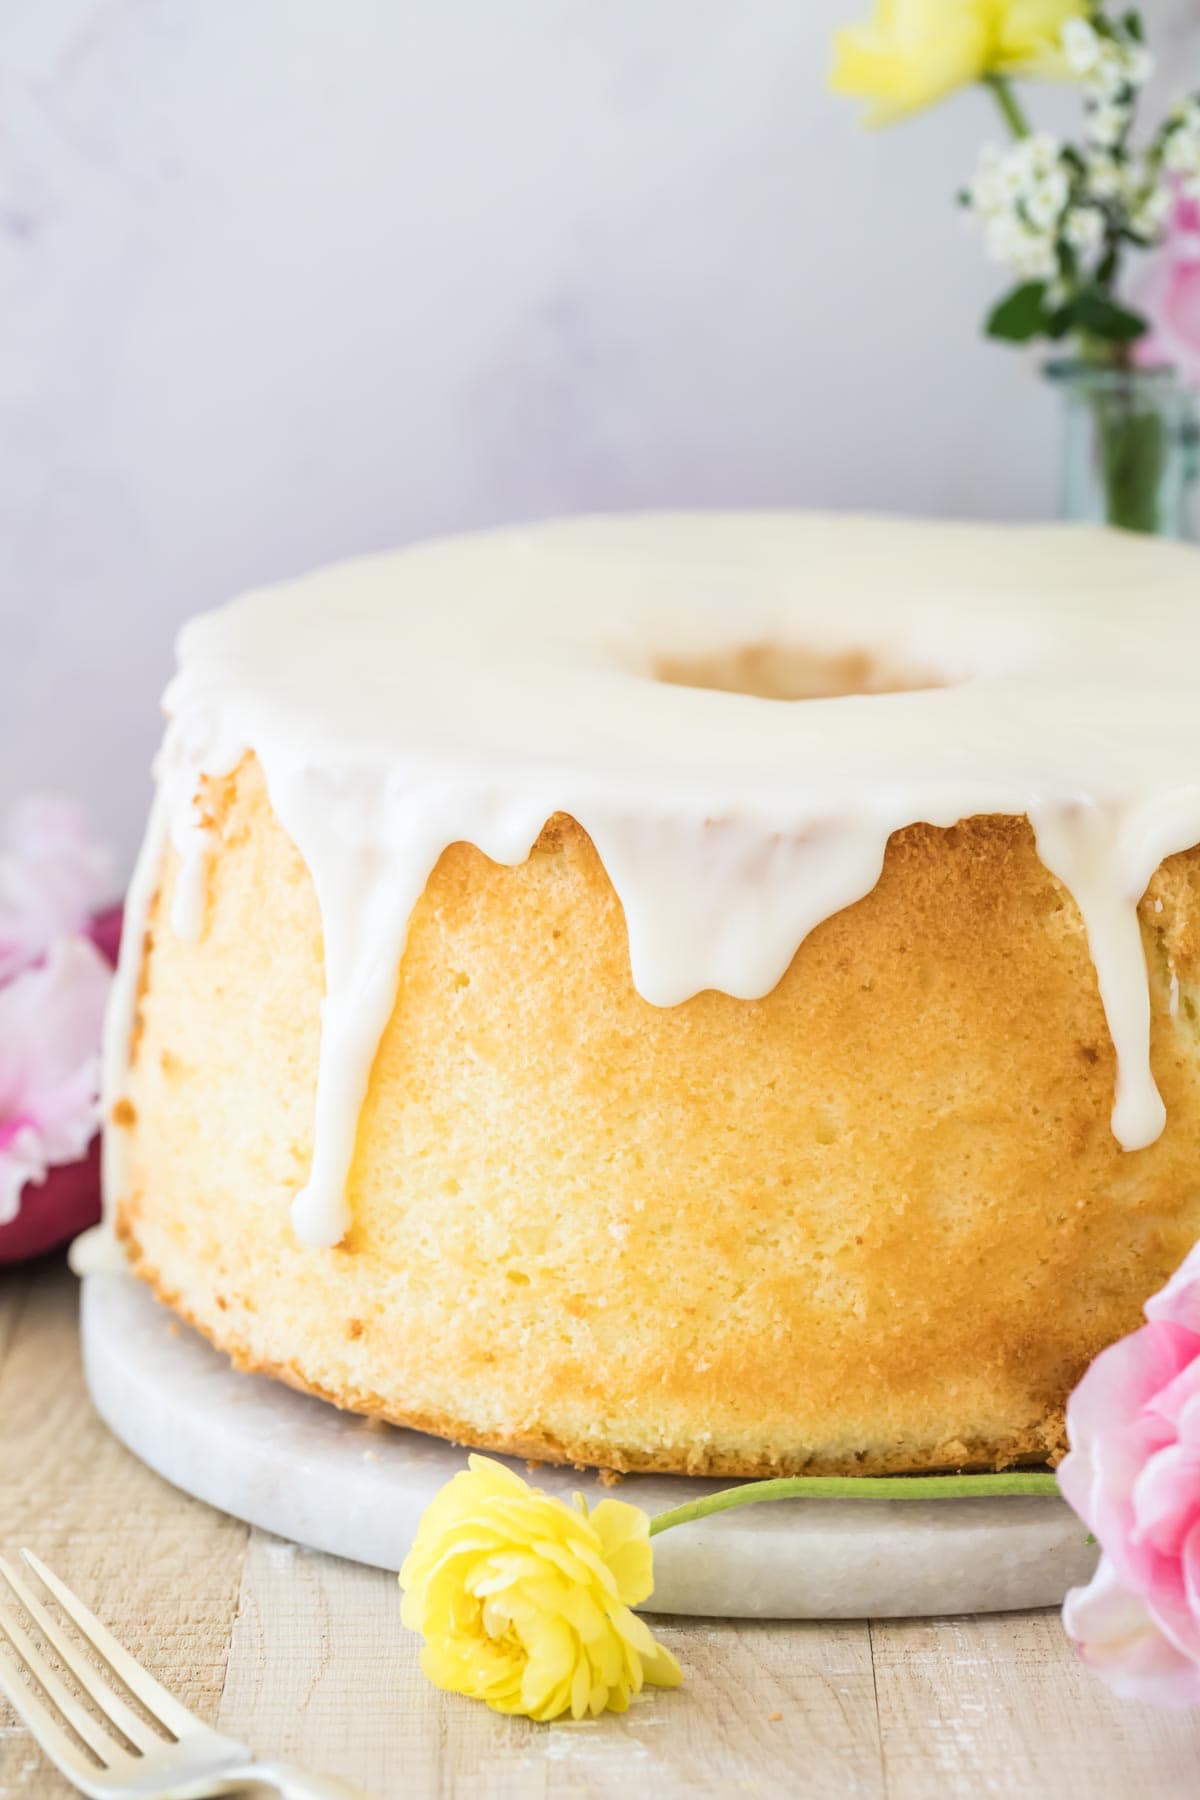 Golden chiffon cake with white glaze surrounded by a pink and yellow flower